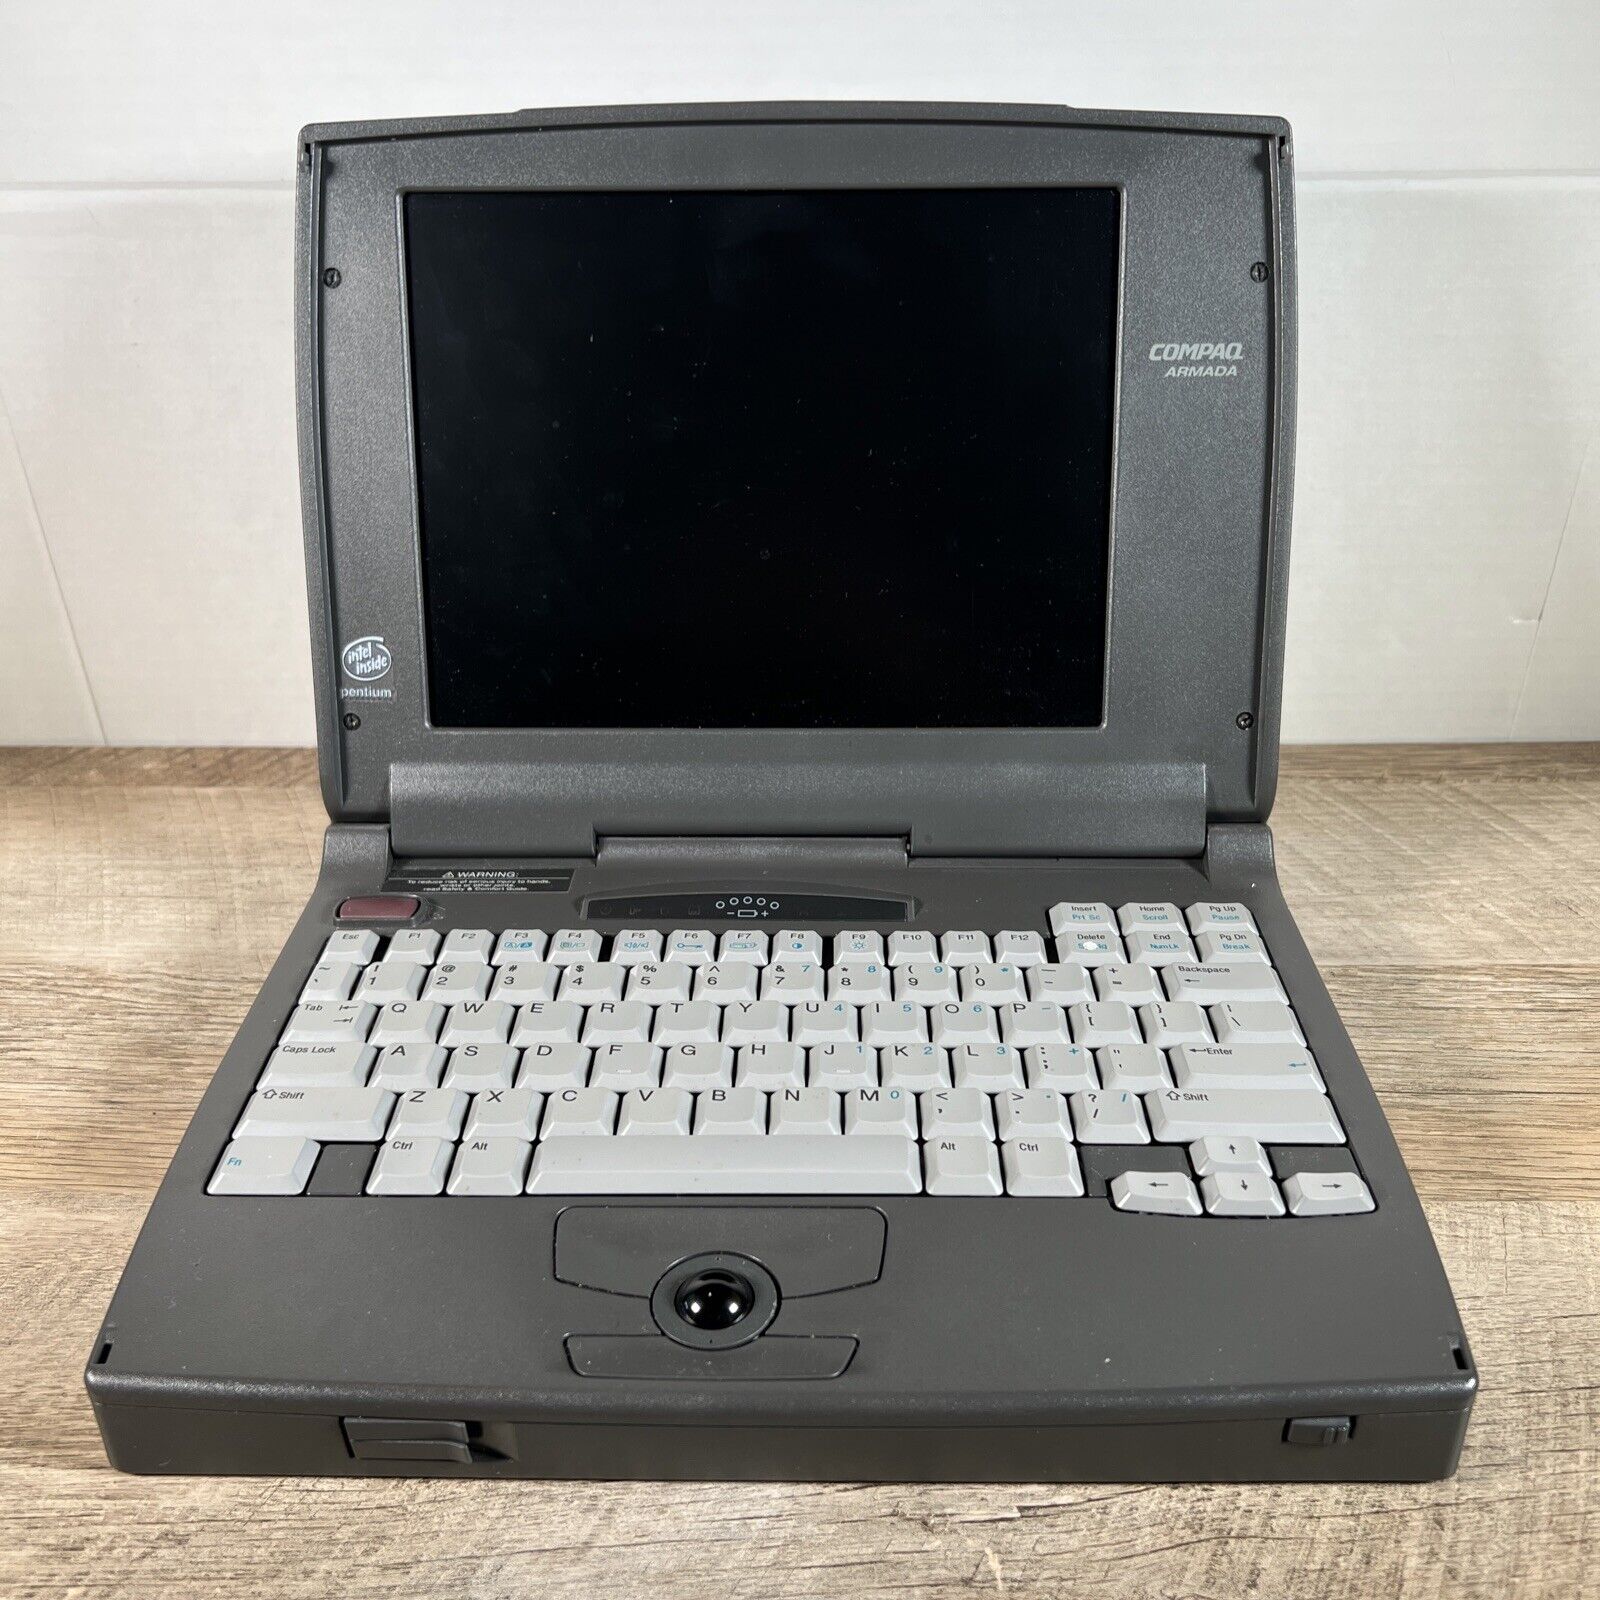 Vintage Compaq Armada 1130T Laptop - Collectable Computer - Untested As Is